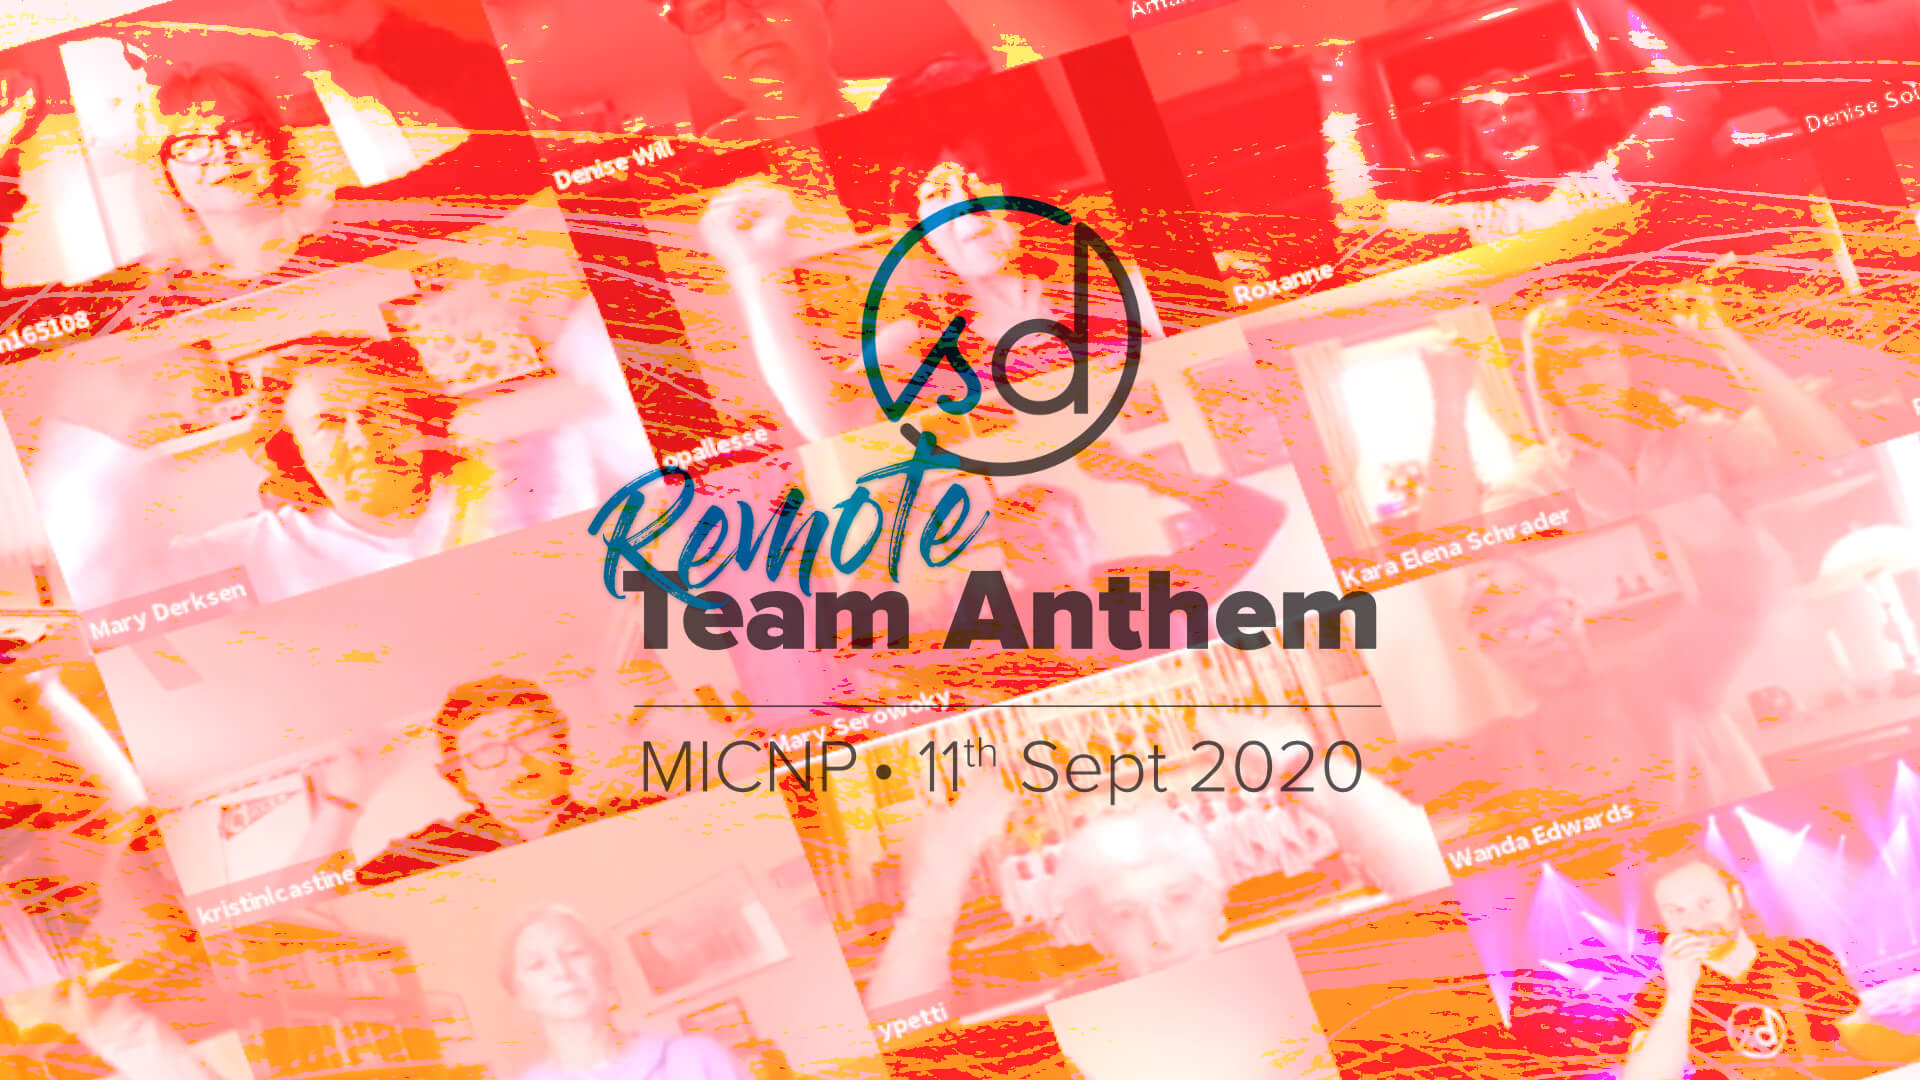 MICNP: Remote Team Anthem with SongDivision